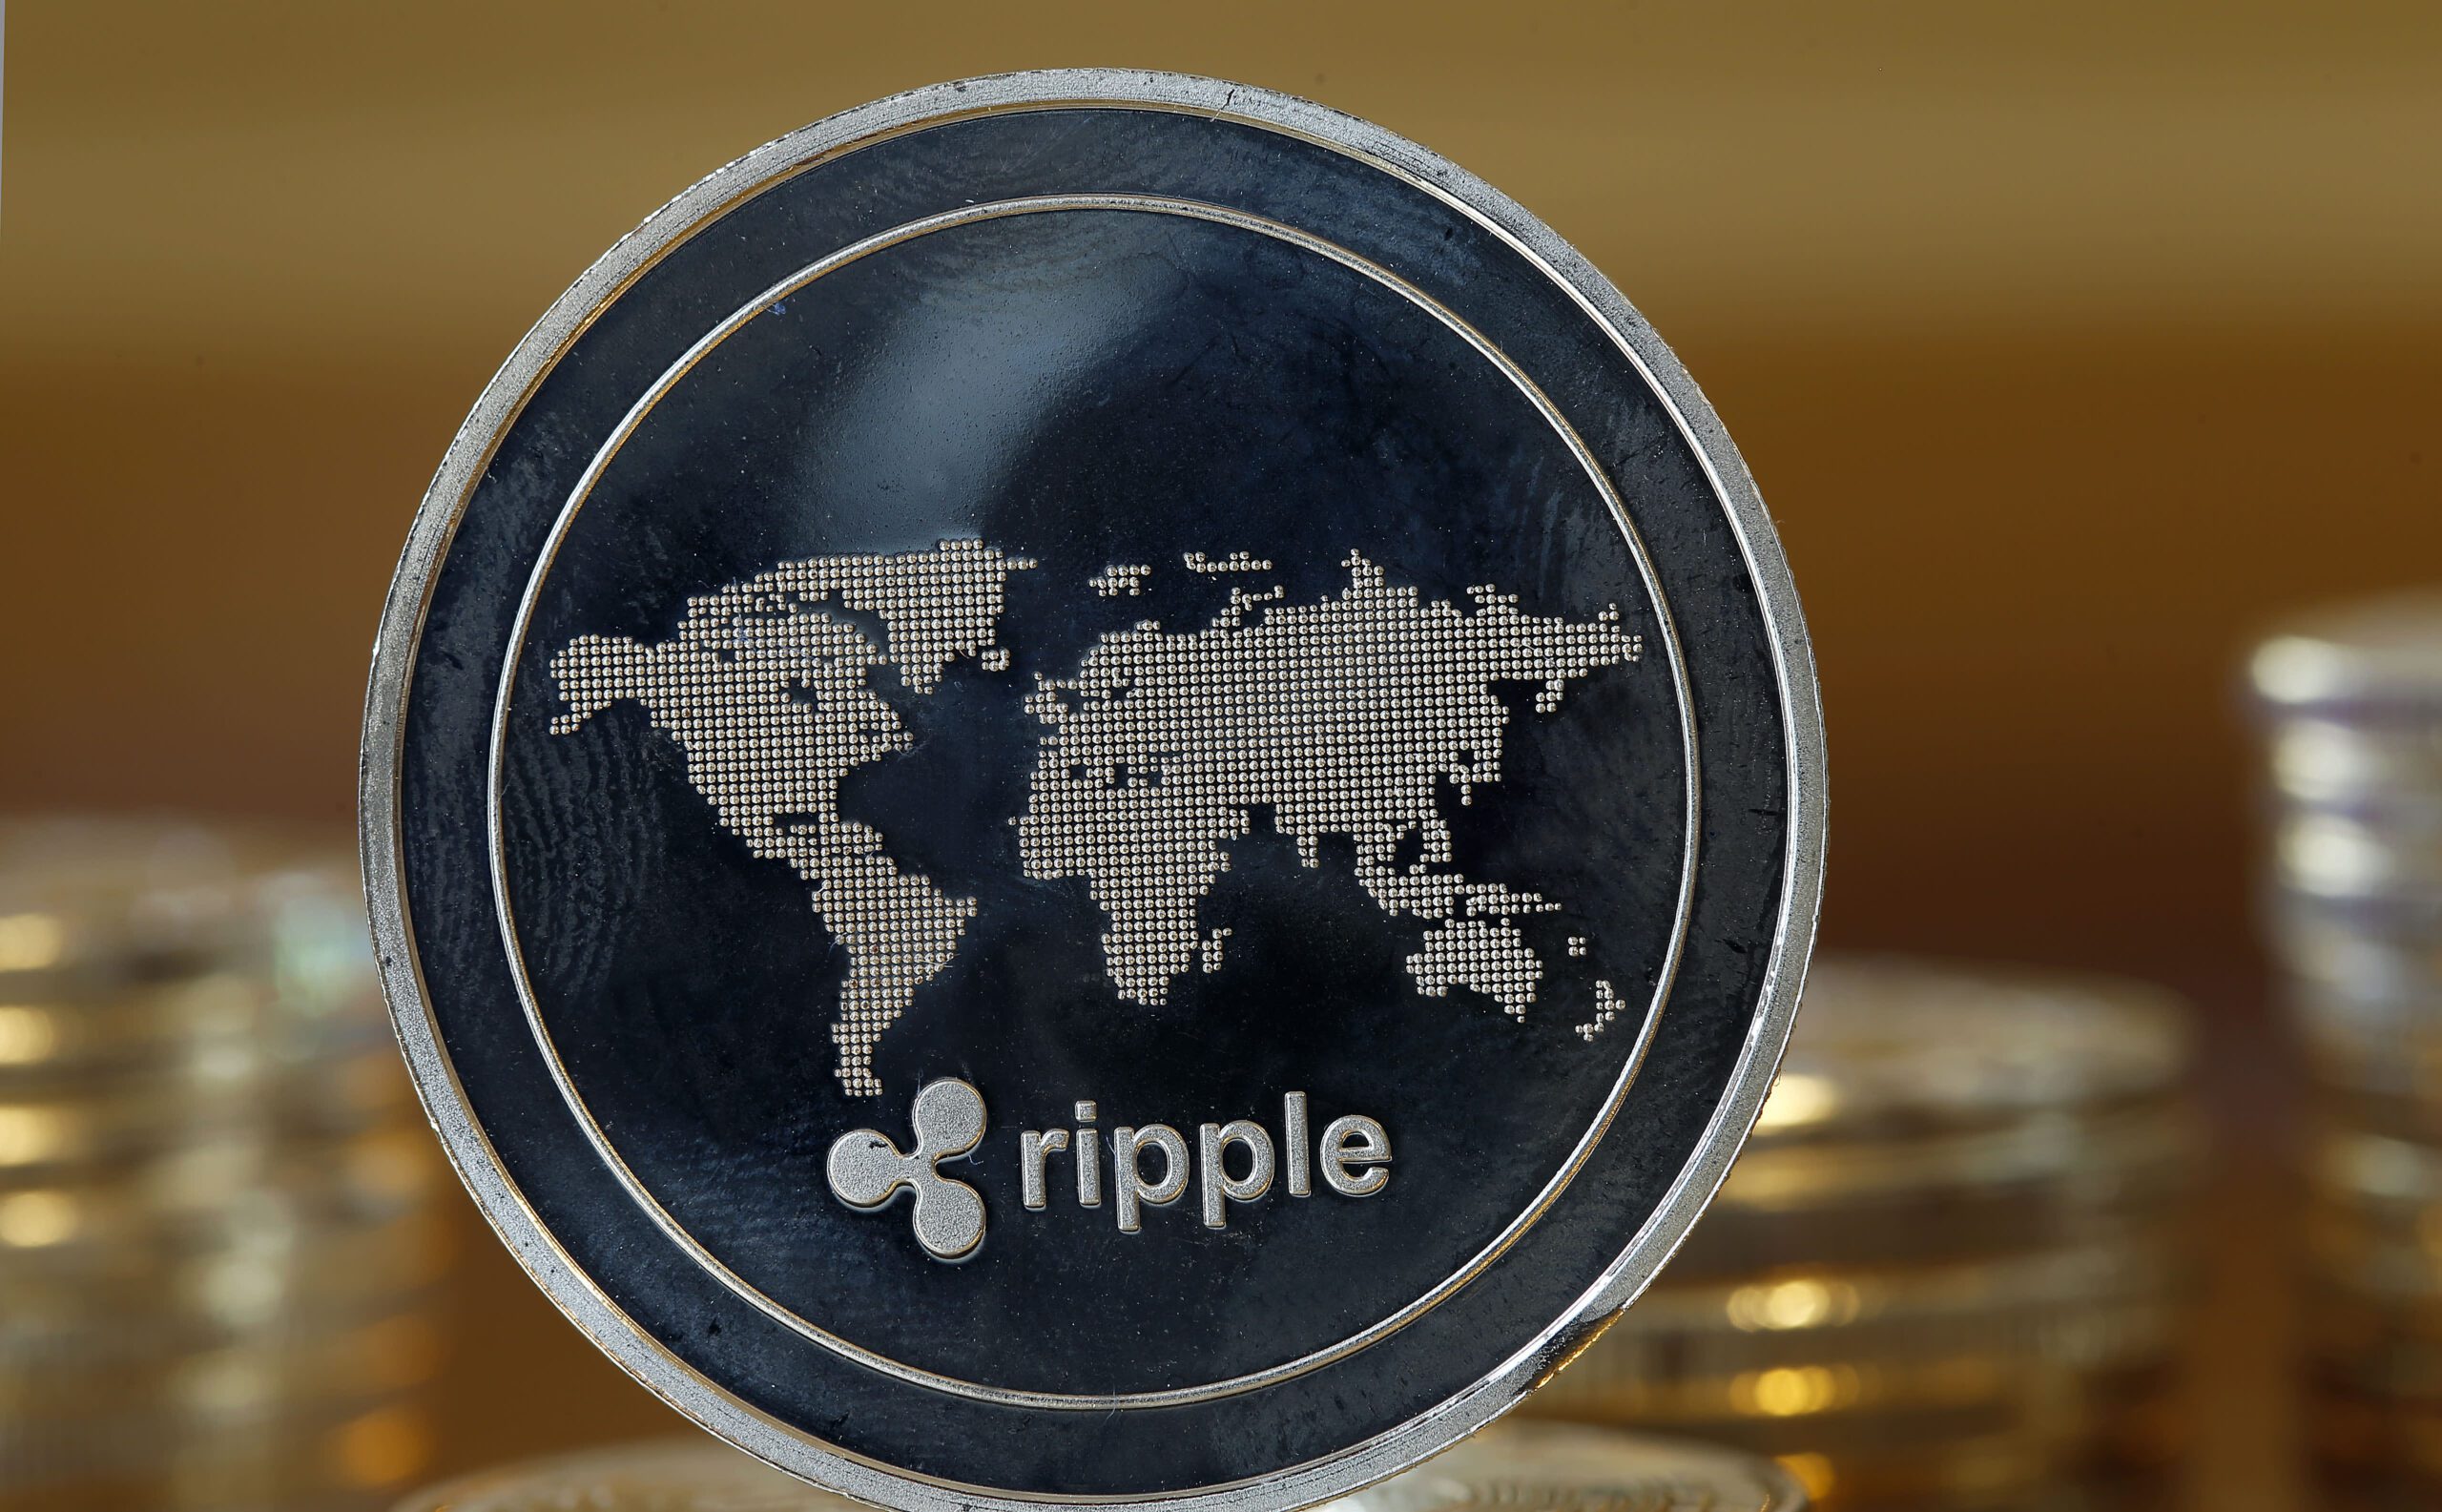 Ripple’s Legal Battle With SEC Continues as SEC Appeals Court Ruling